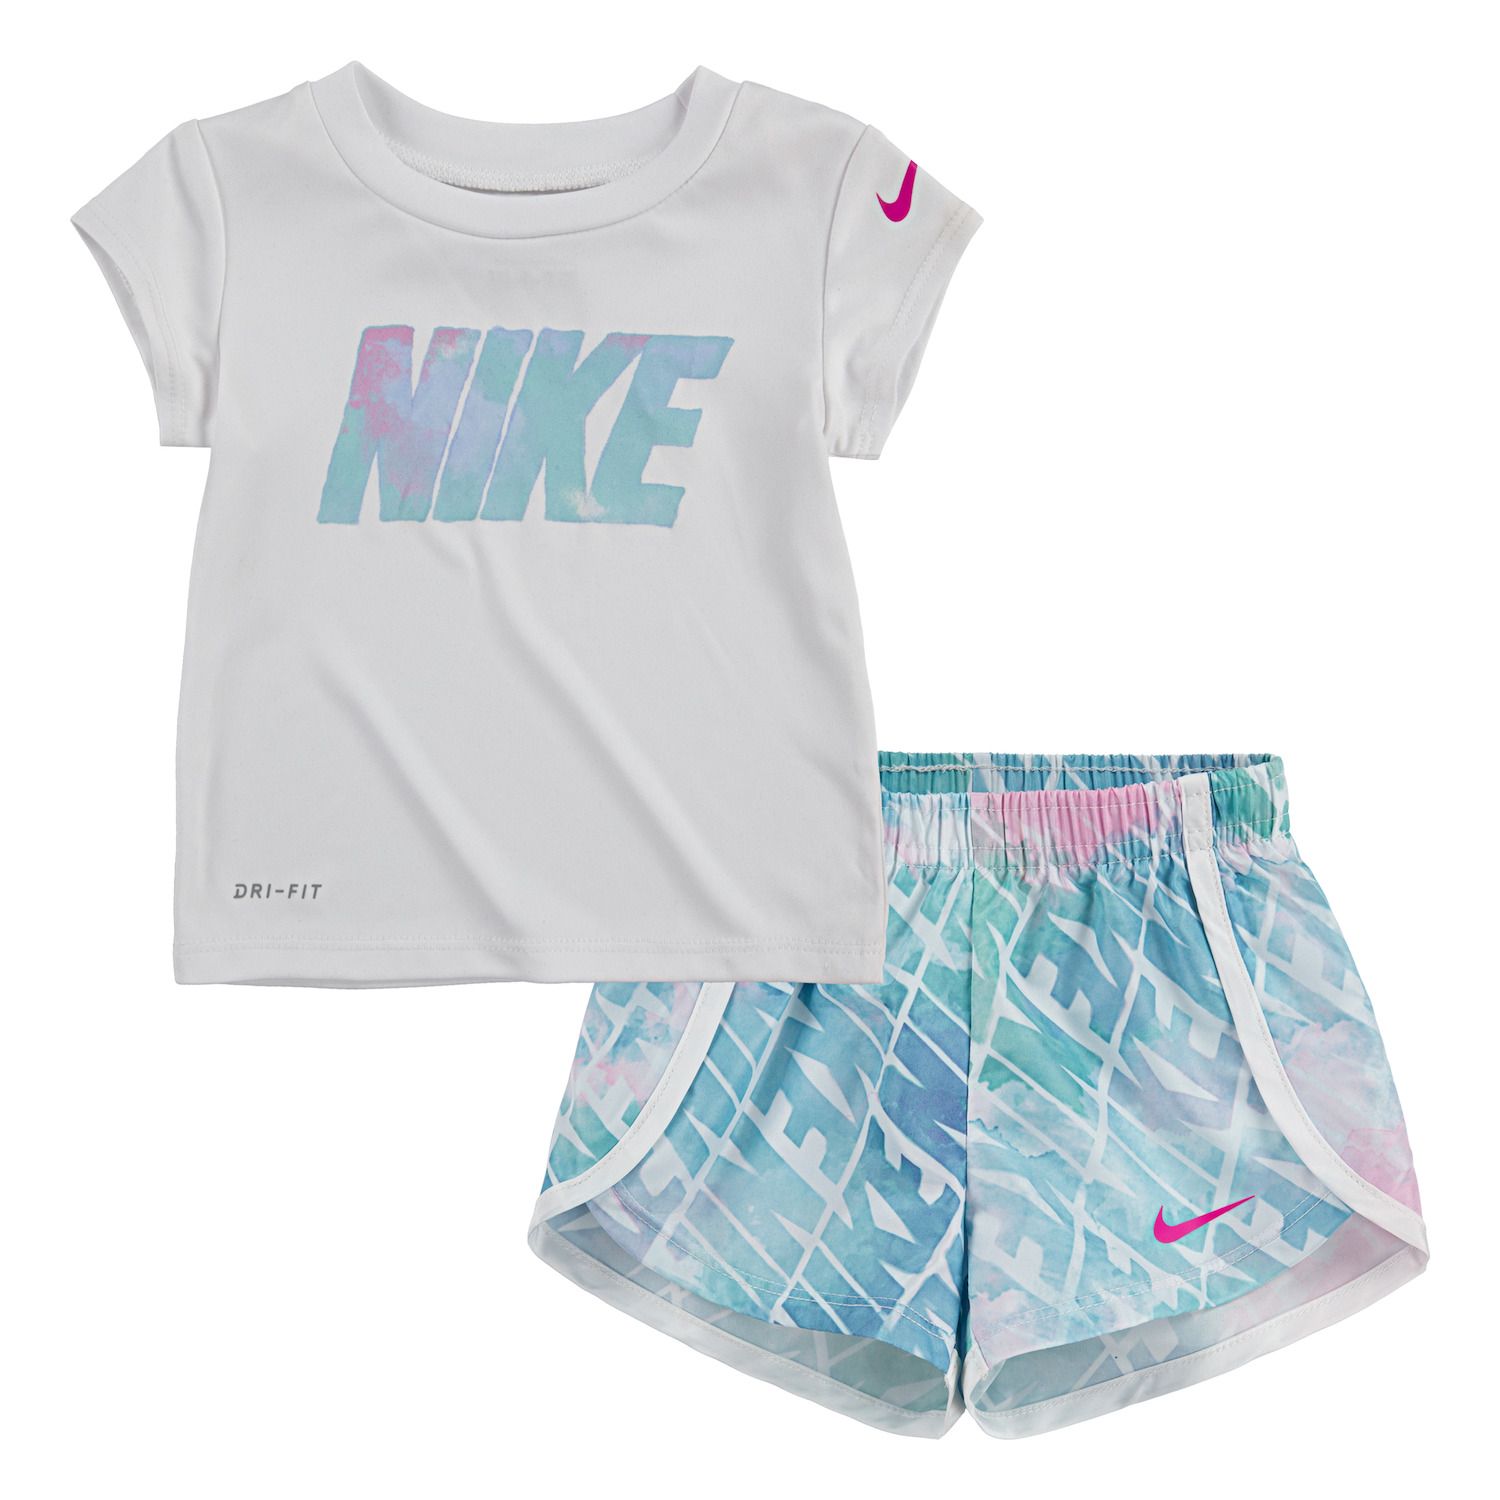 nike baby clothes 18 months